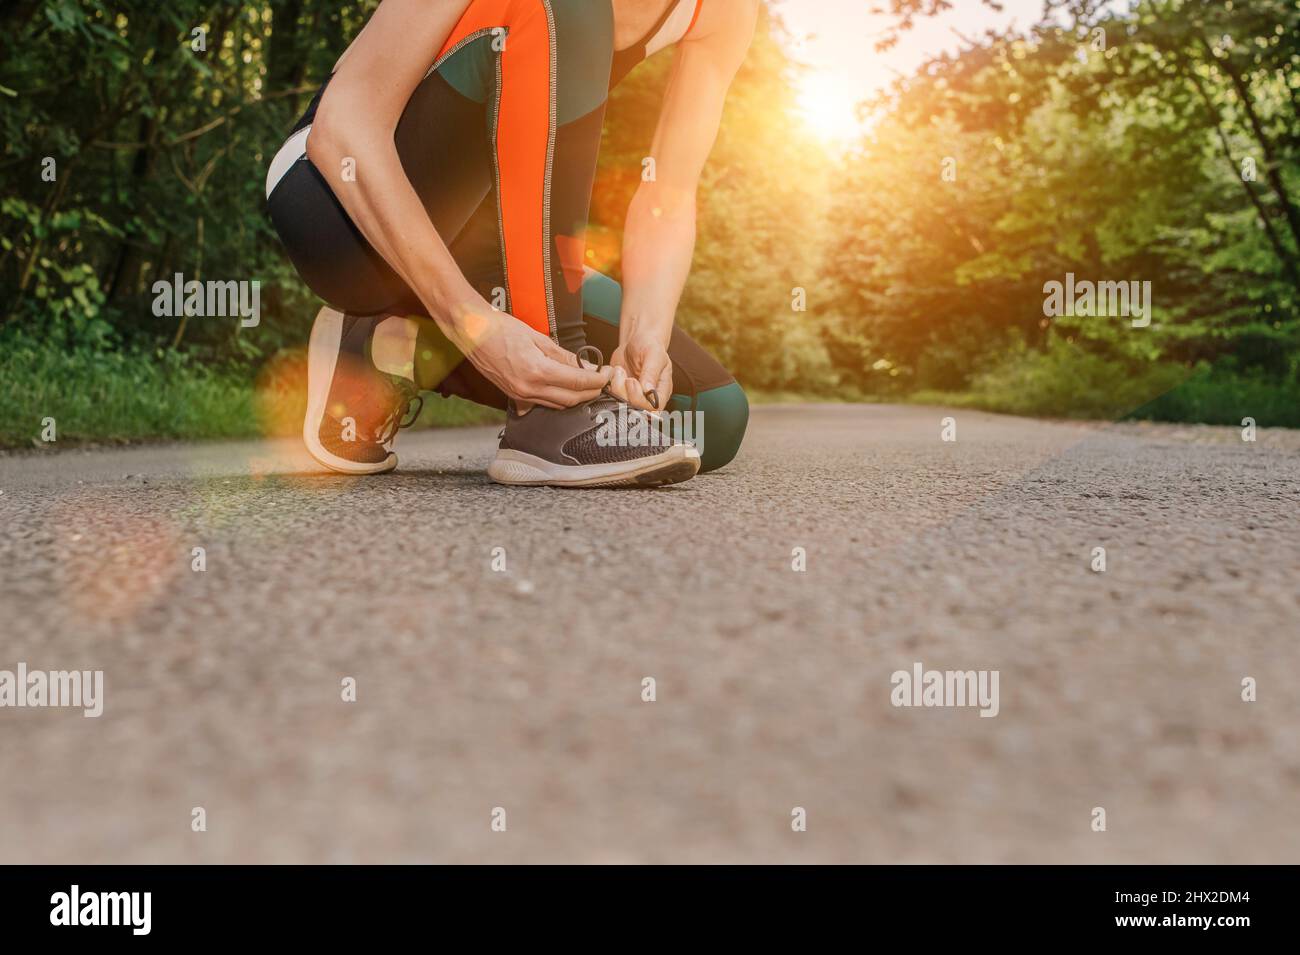 Woman runner tying shoelaces on her shoes before running on the road Stock Photo